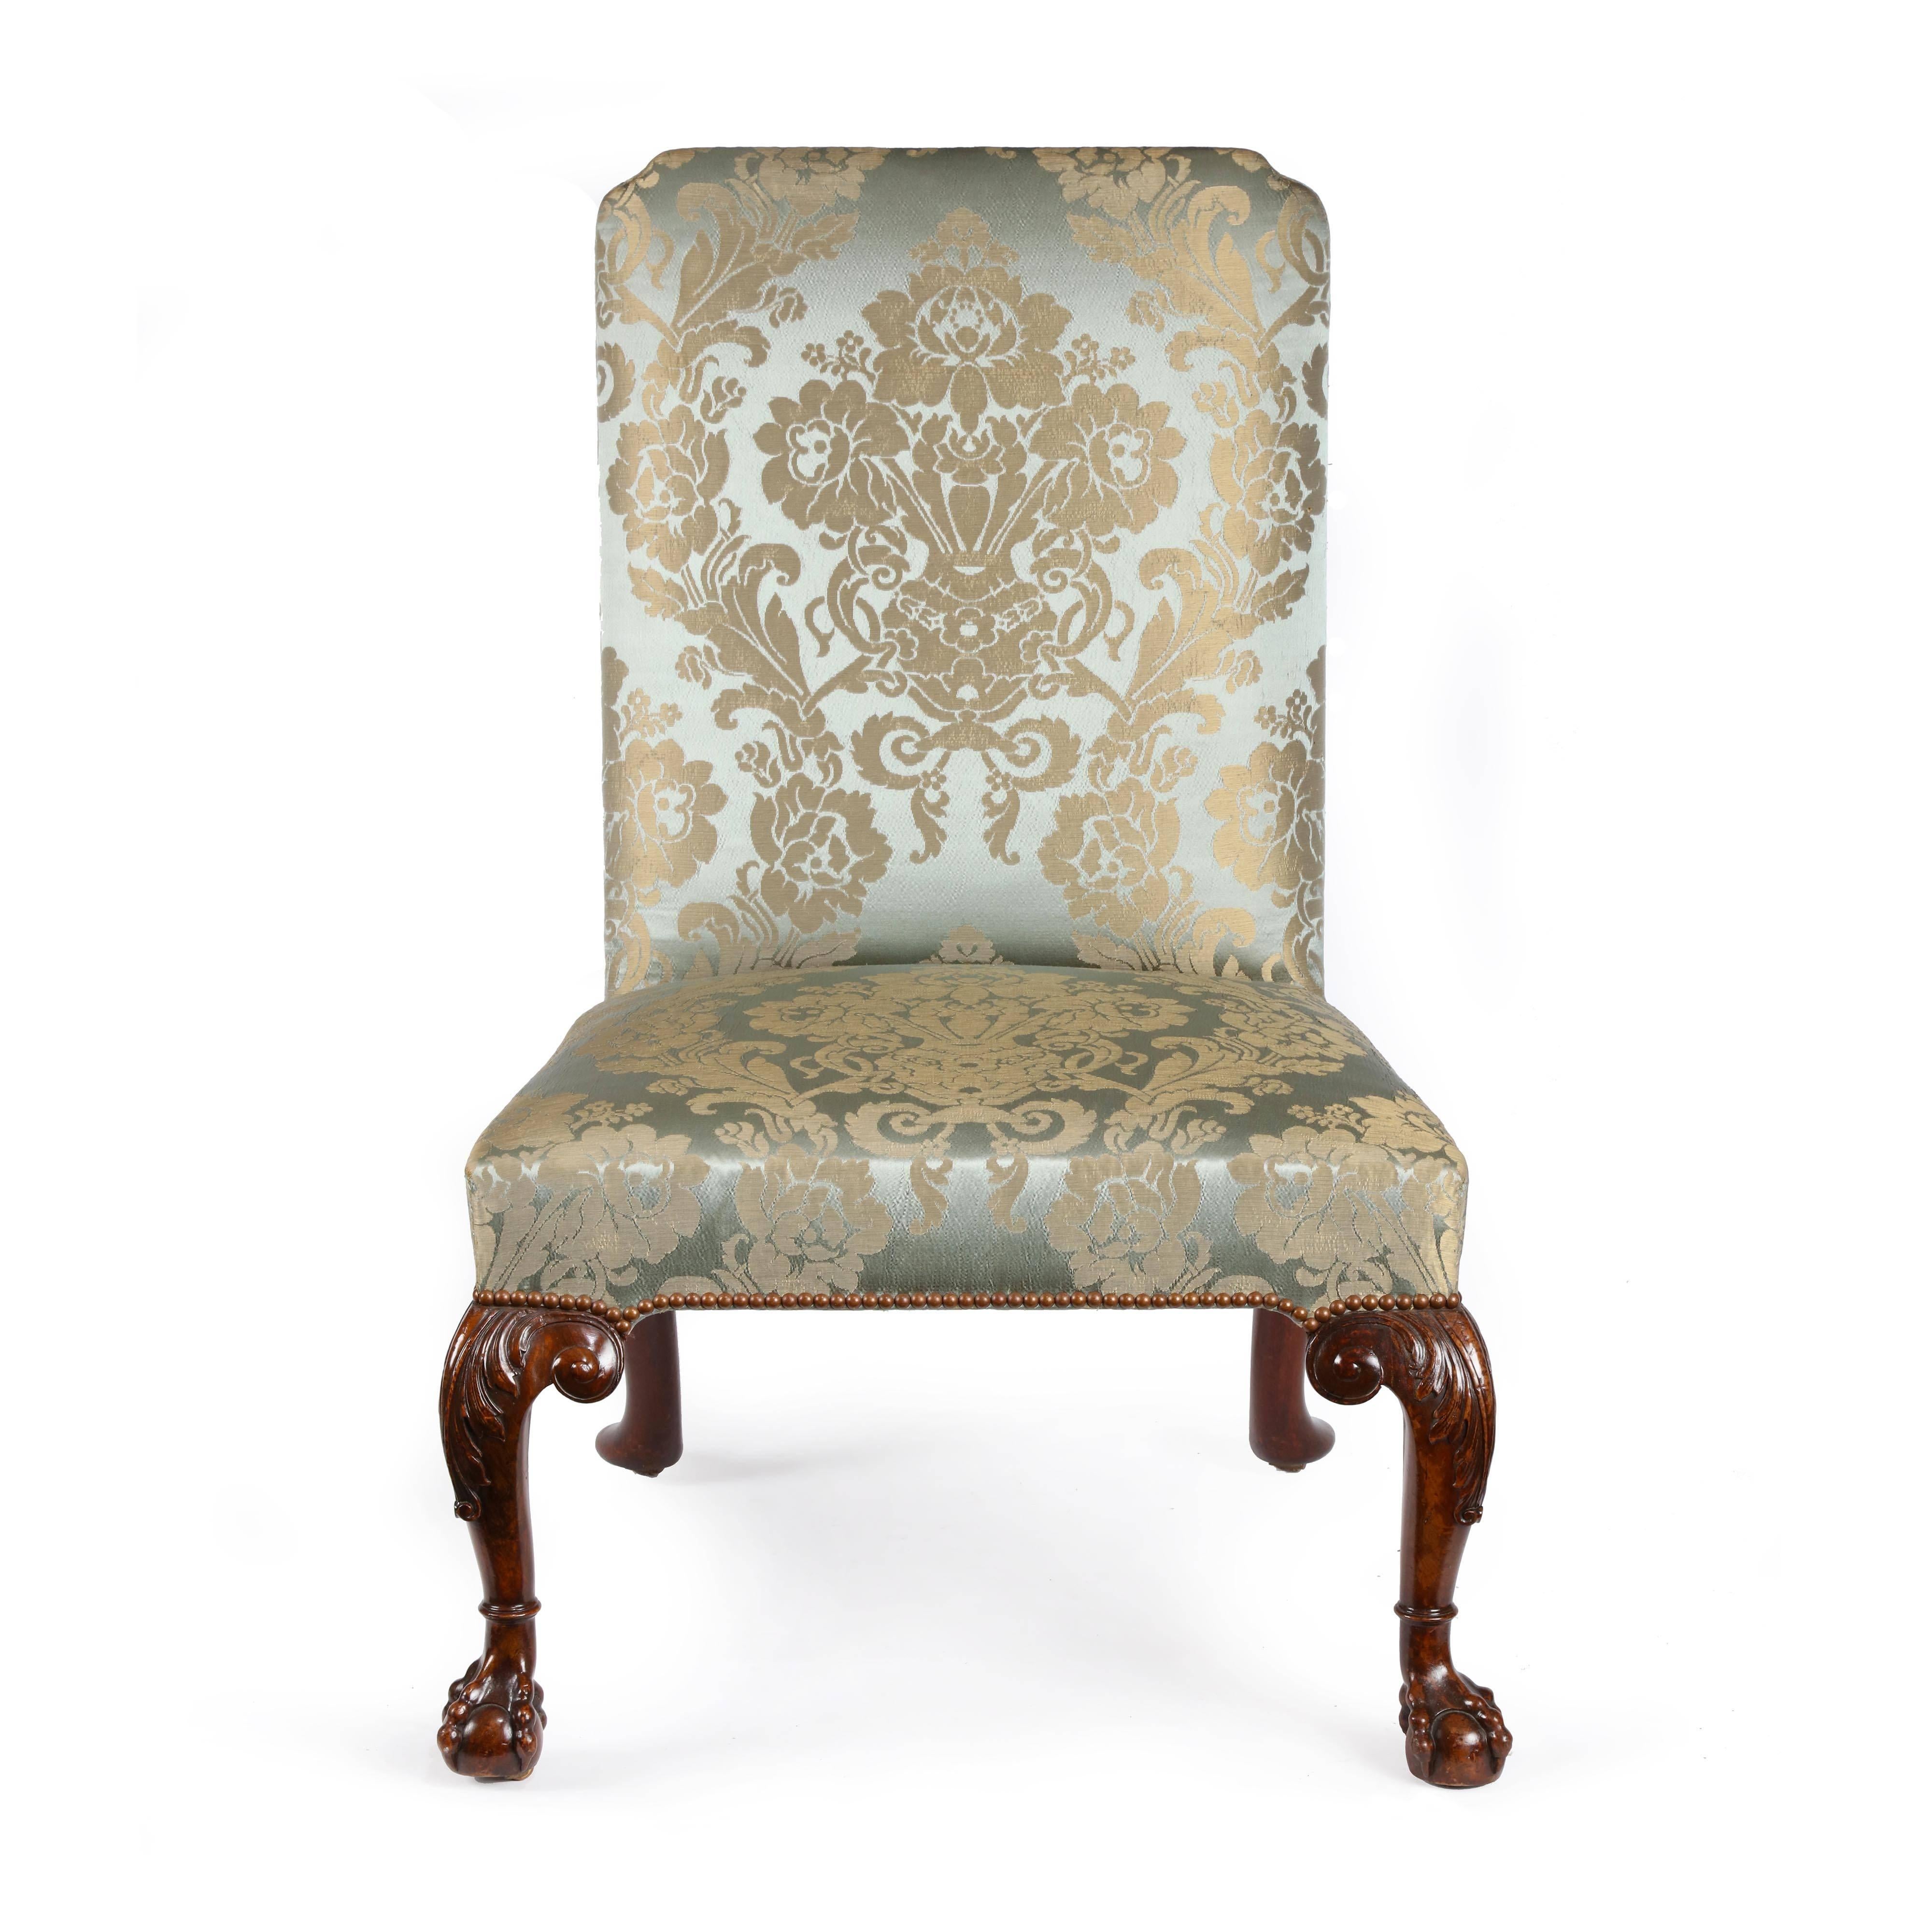 A fine pair of George II carved walnut side chairs attributed to William Hallett. The rectangular shaped silk damask upholstered backs with top curved re-entrant corners, The seat section of square tapering section, with upholstery close nailed